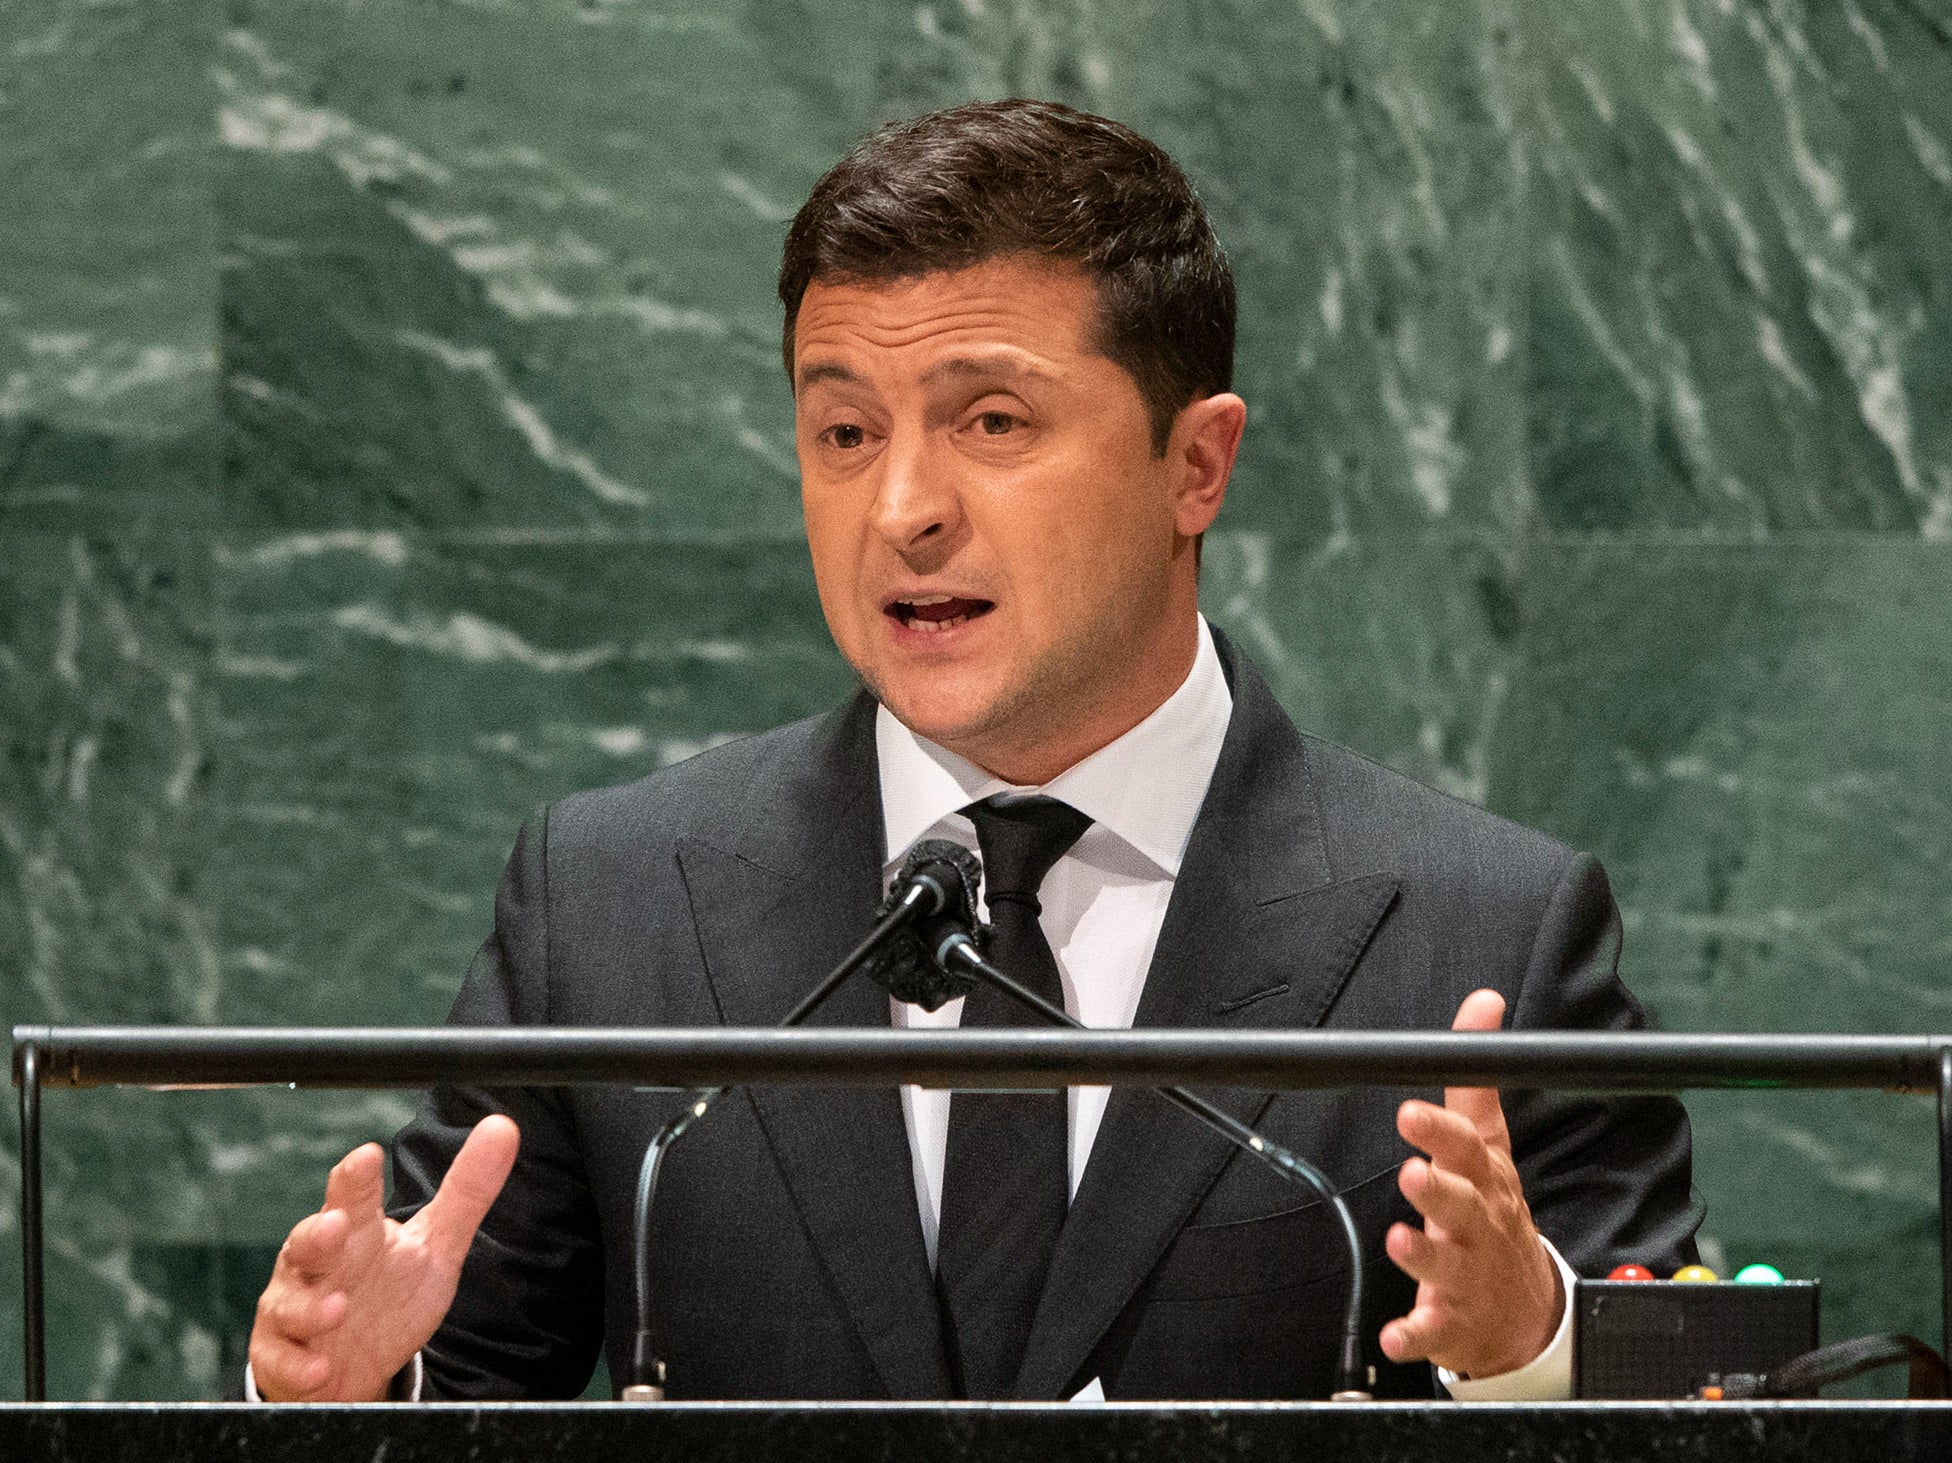 Zelenskiy addresses the 76th Session of the UN General Assembly in New York City this week